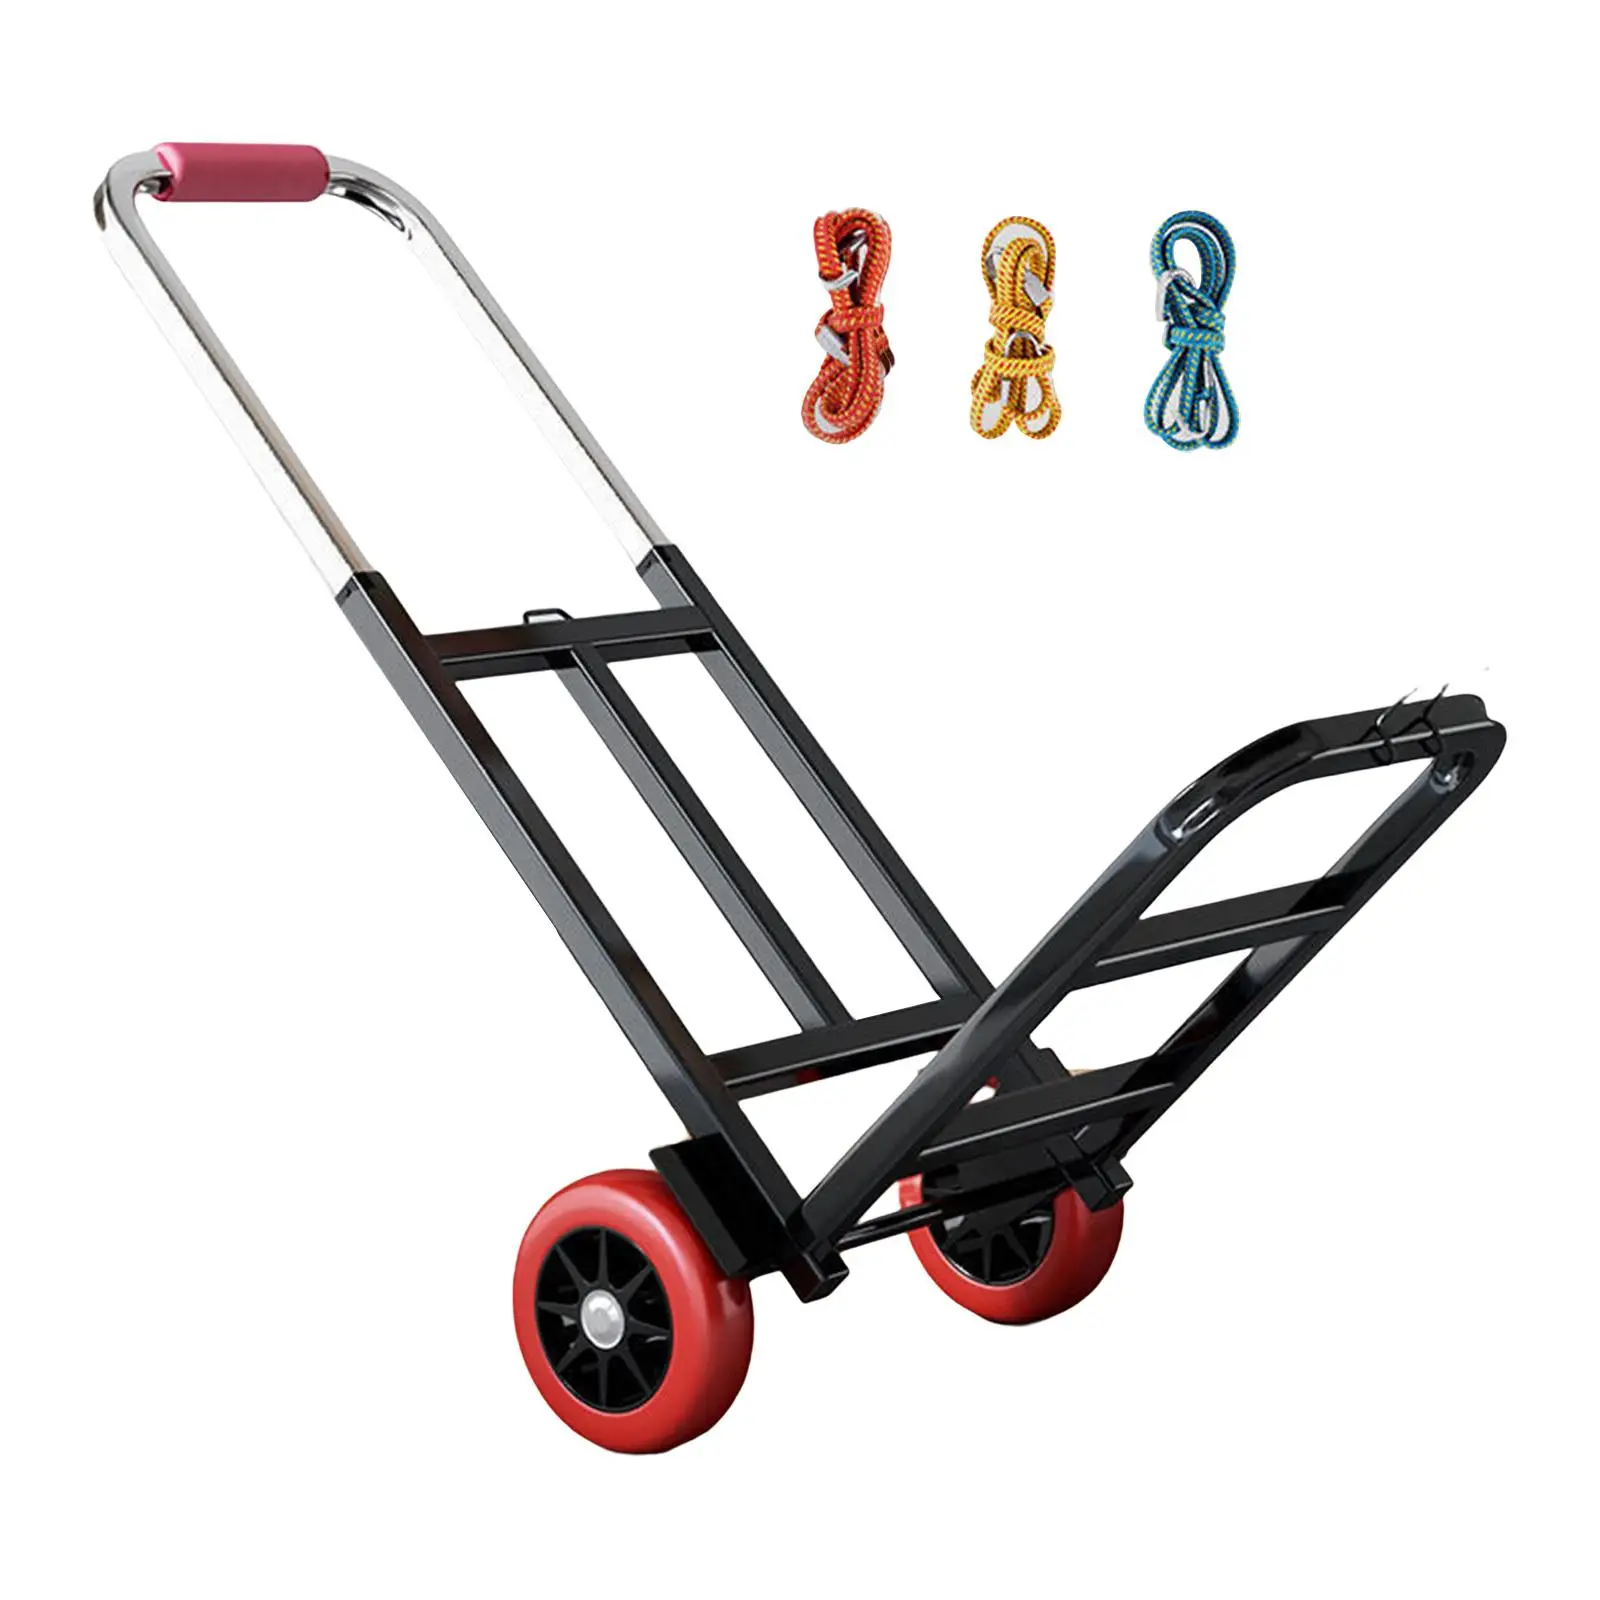 Folding Hand Truck Portable Compact Rubber Wheels Luggage Trolley Cart Max 154lb for Outdoor Shopping Moving Traveling Grocery